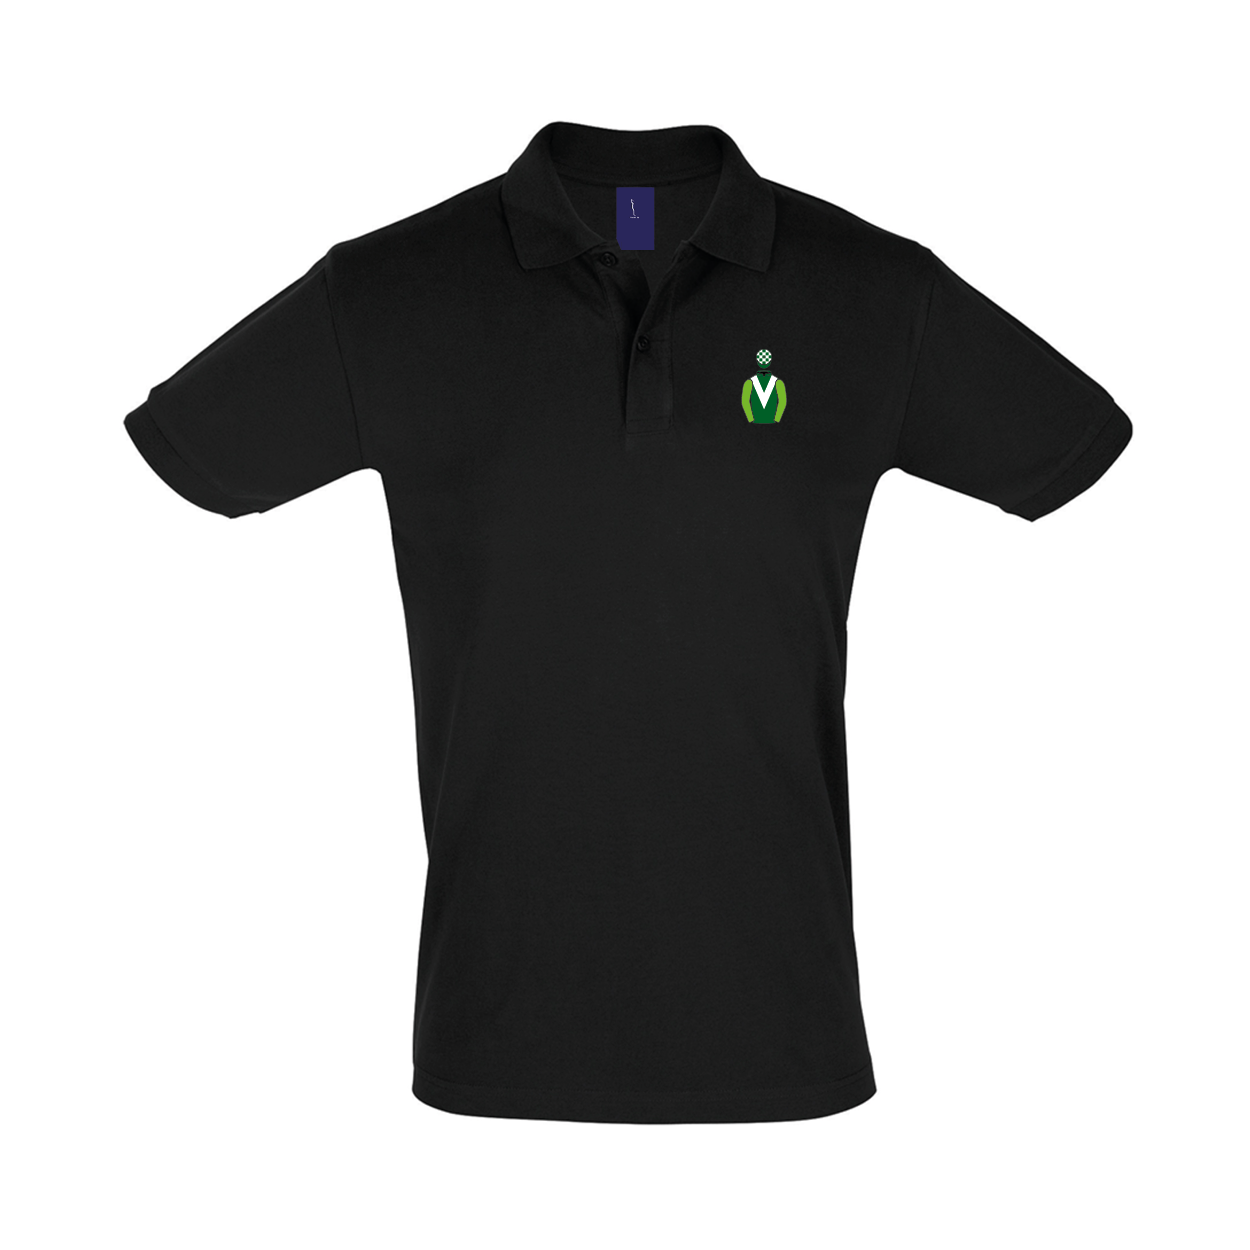 Ladies Paul Barber Embroidered Polo Shirt - Clothing - Hacked Up